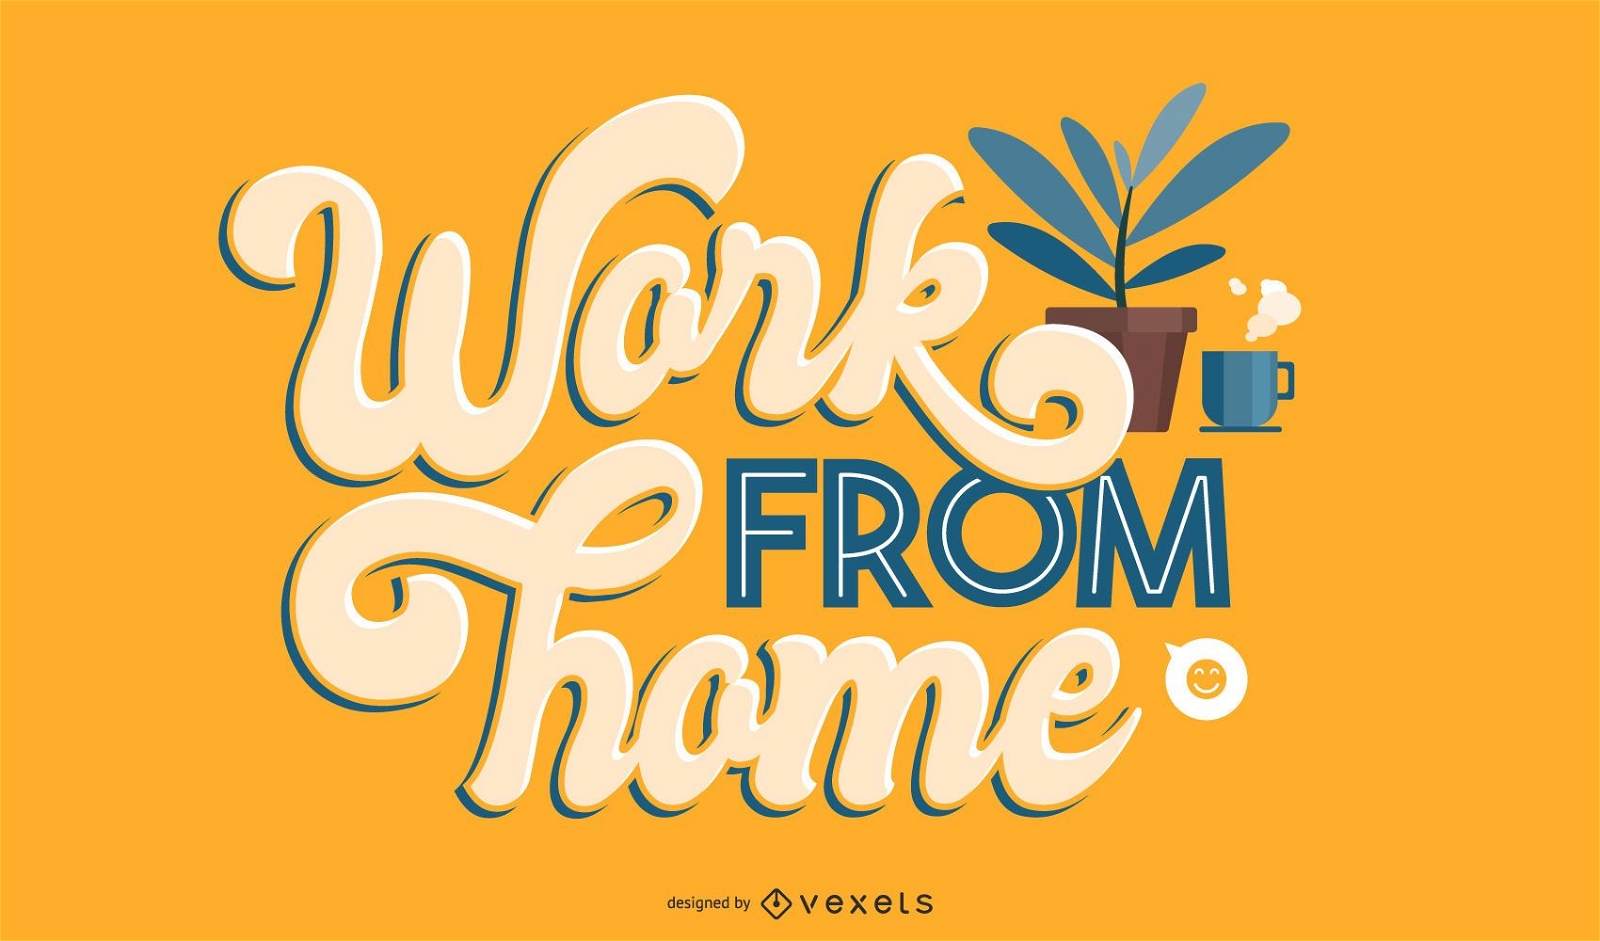 Work from home covid lettering